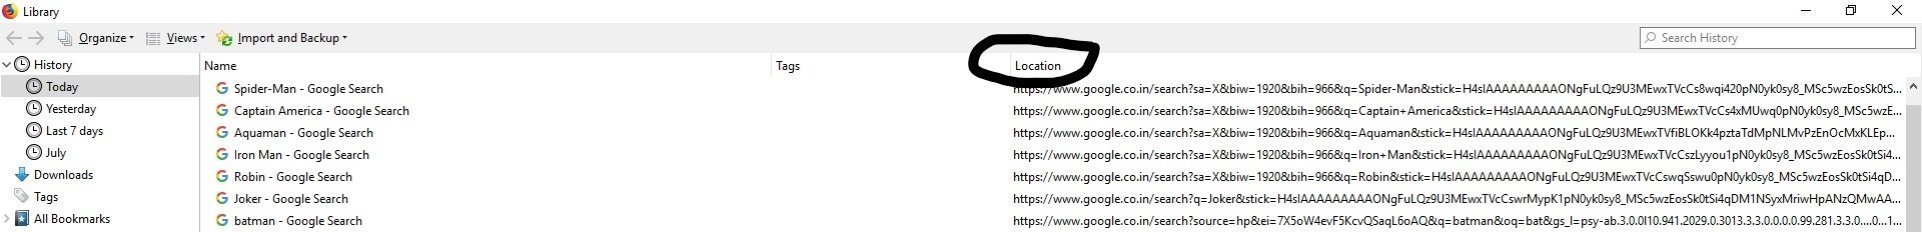 What is the 'Location' tab in firefox history for. When I click on it, the order of the... a750ce13-c864-4a1f-838e-703031339317?upload=true.jpg